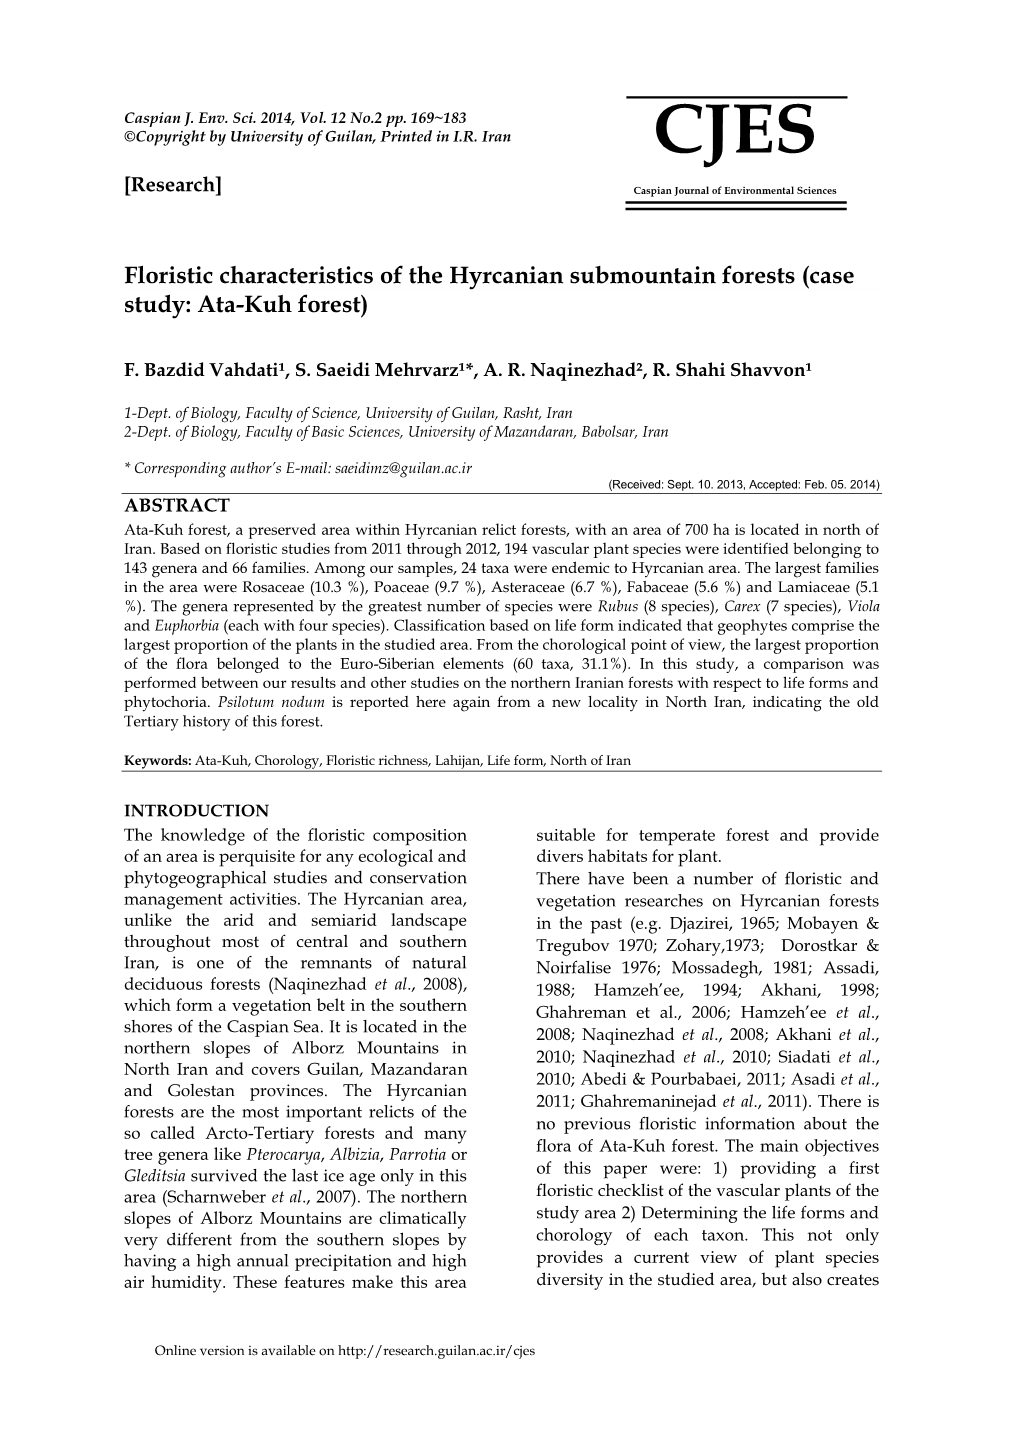 Floristic Characteristics of the Hyrcanian Submountain Forests (Case Study: Ata-Kuh Forest)